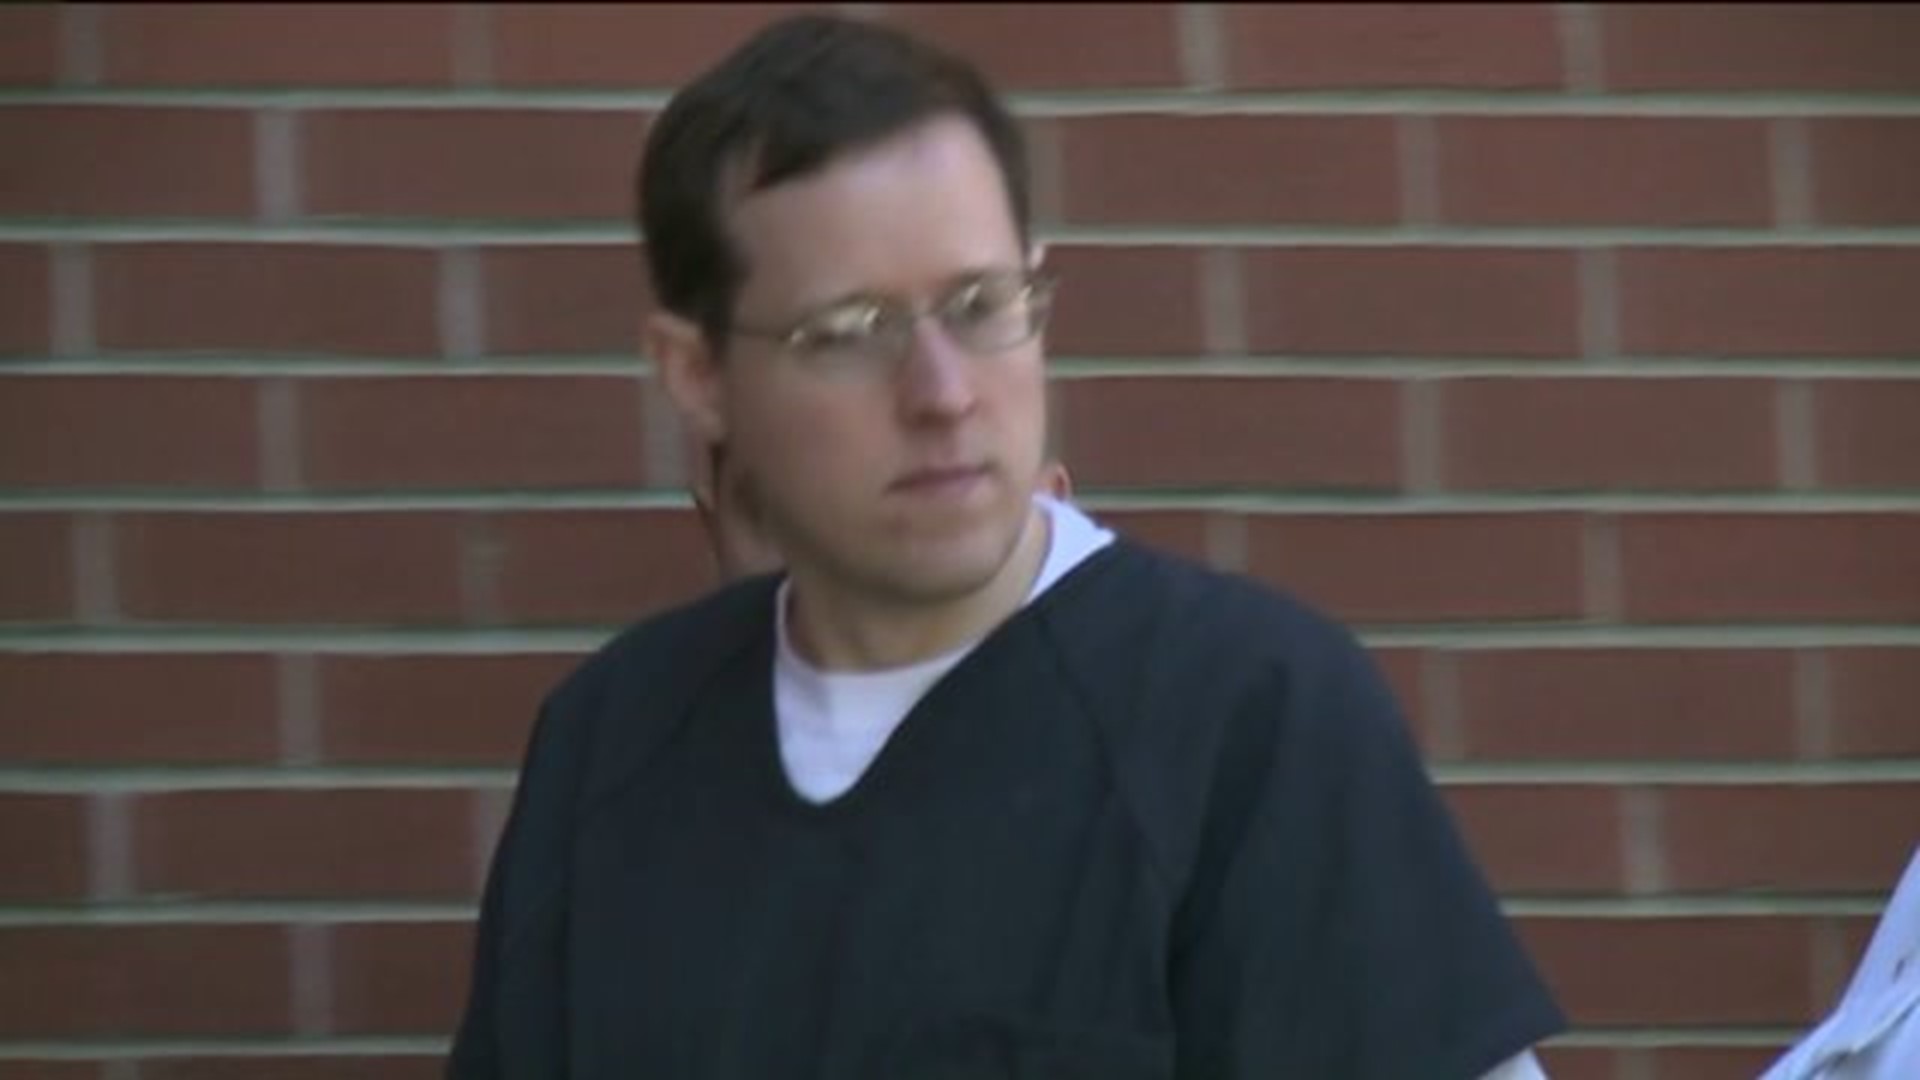 Frein Trial Means Possible Tax Hike